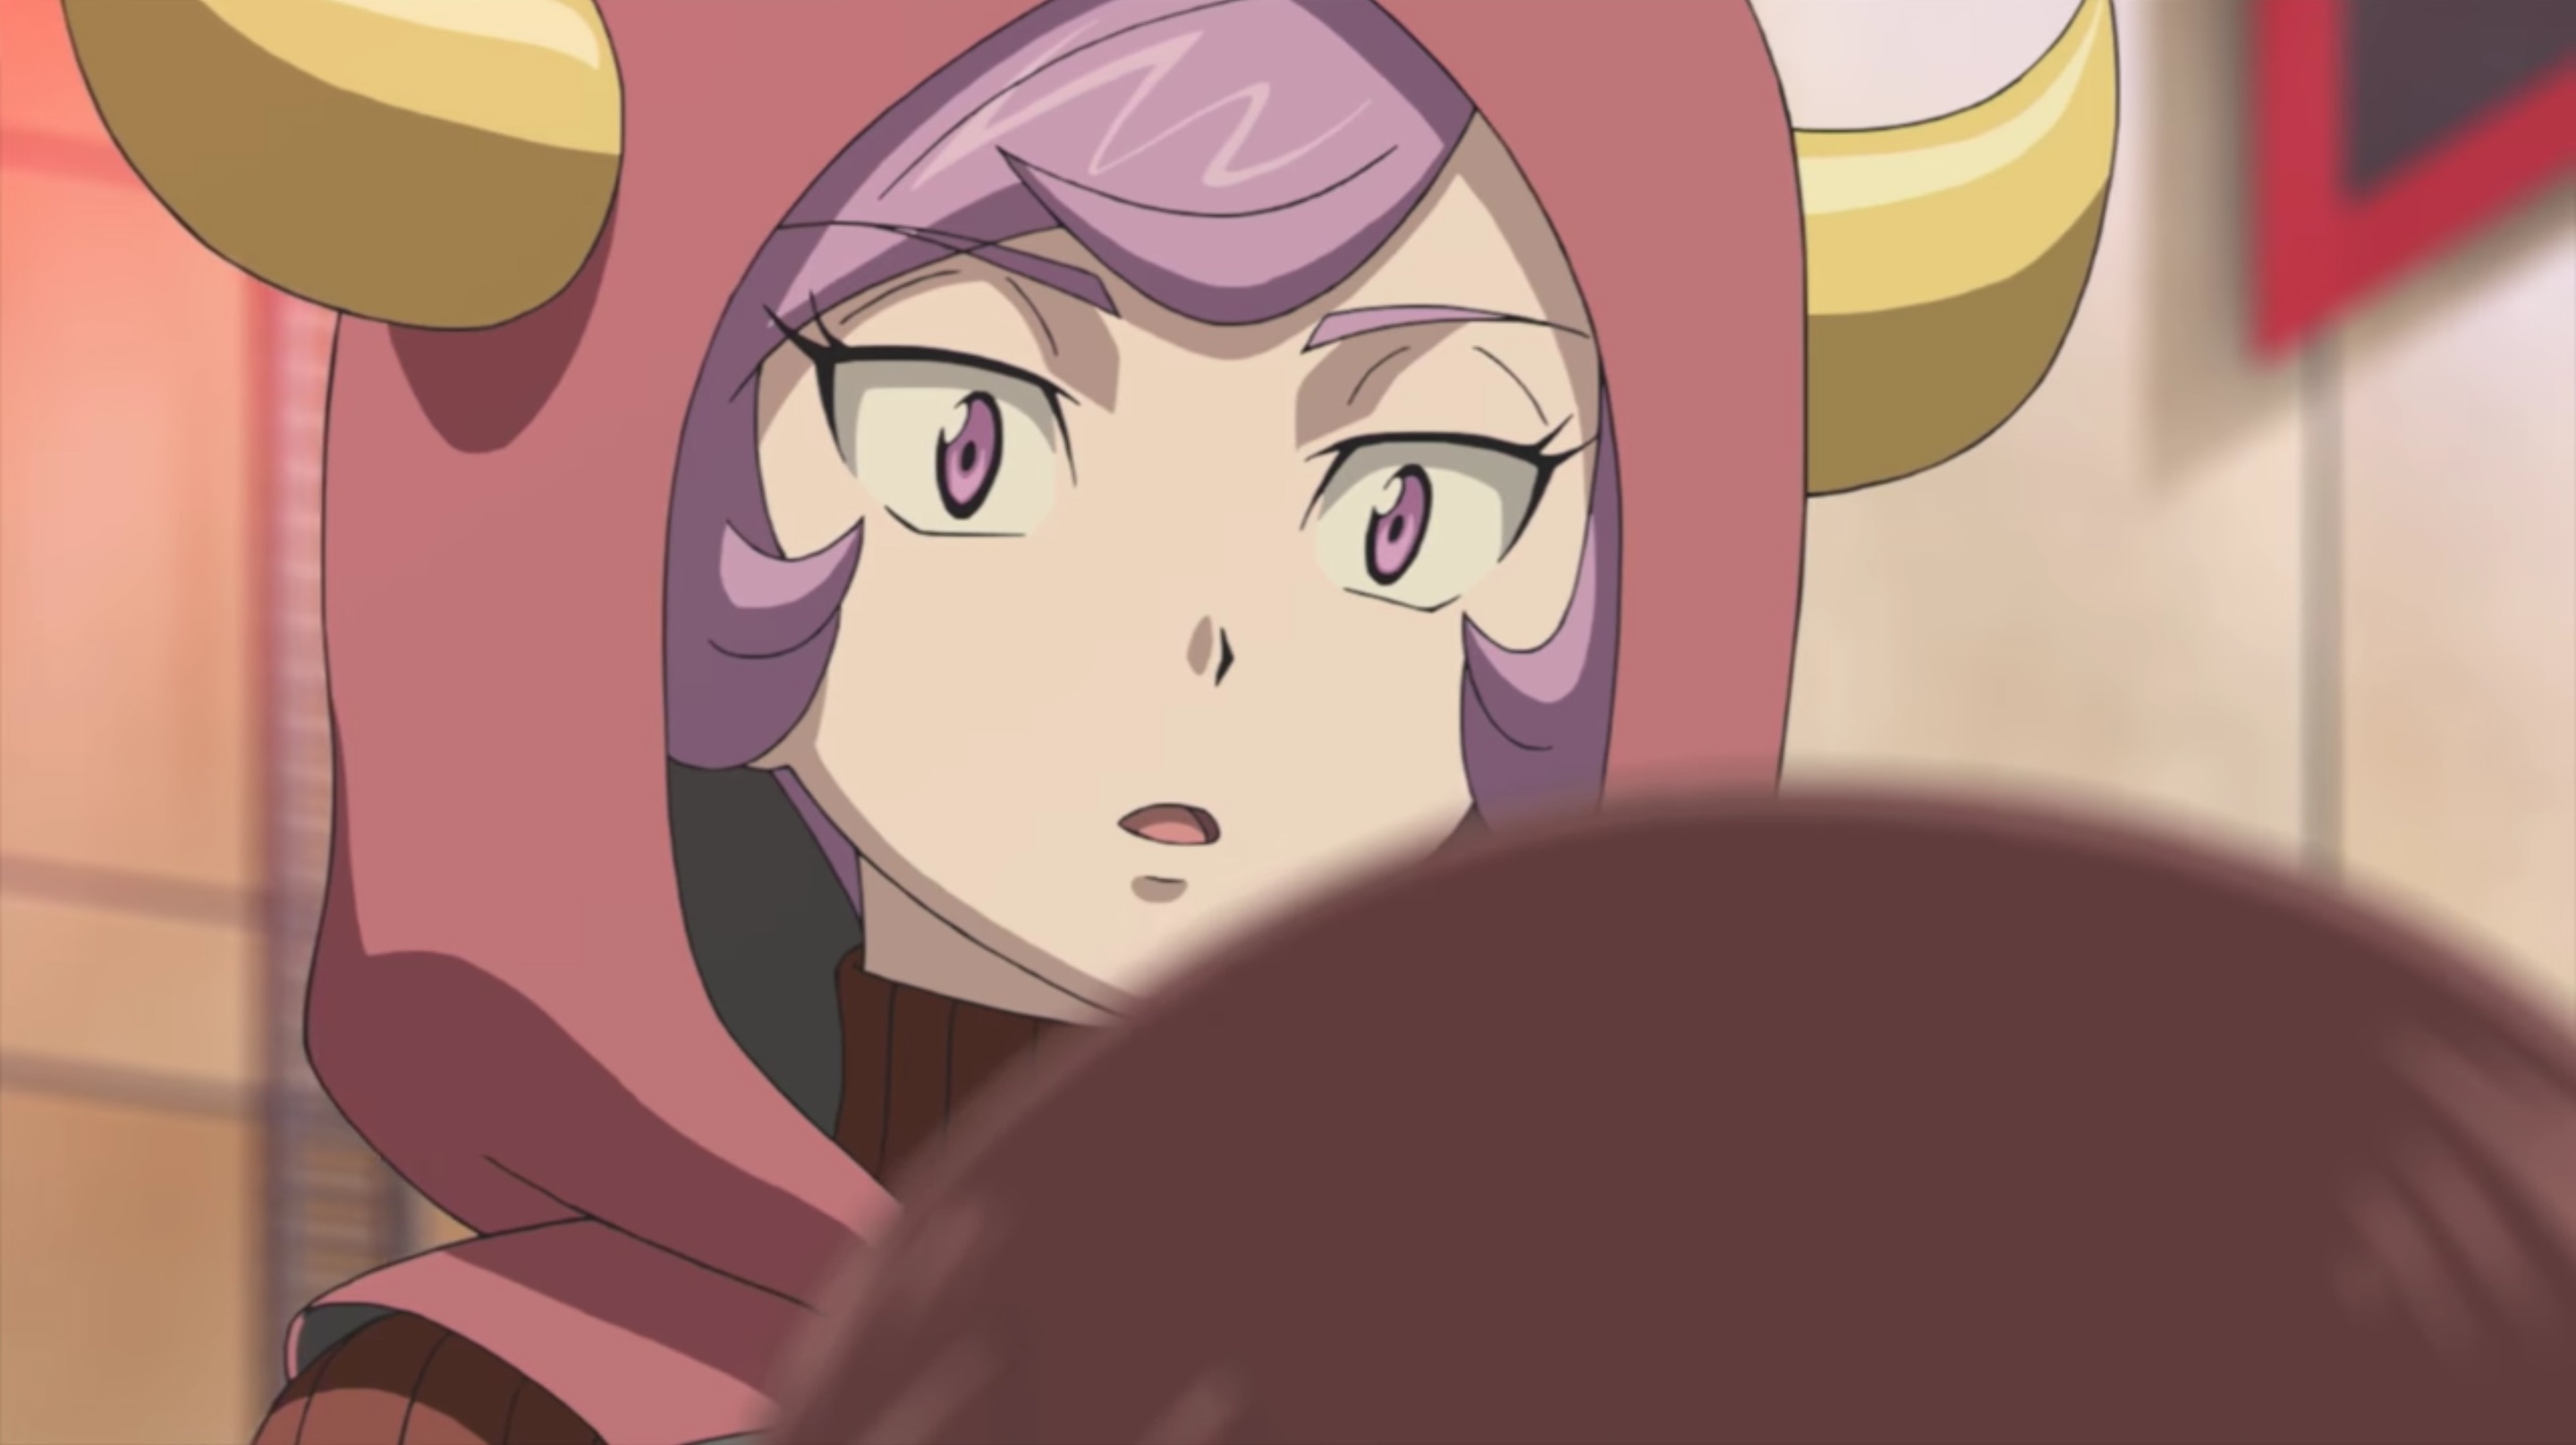 Pokemon Generations Episode 7: The Vision Released